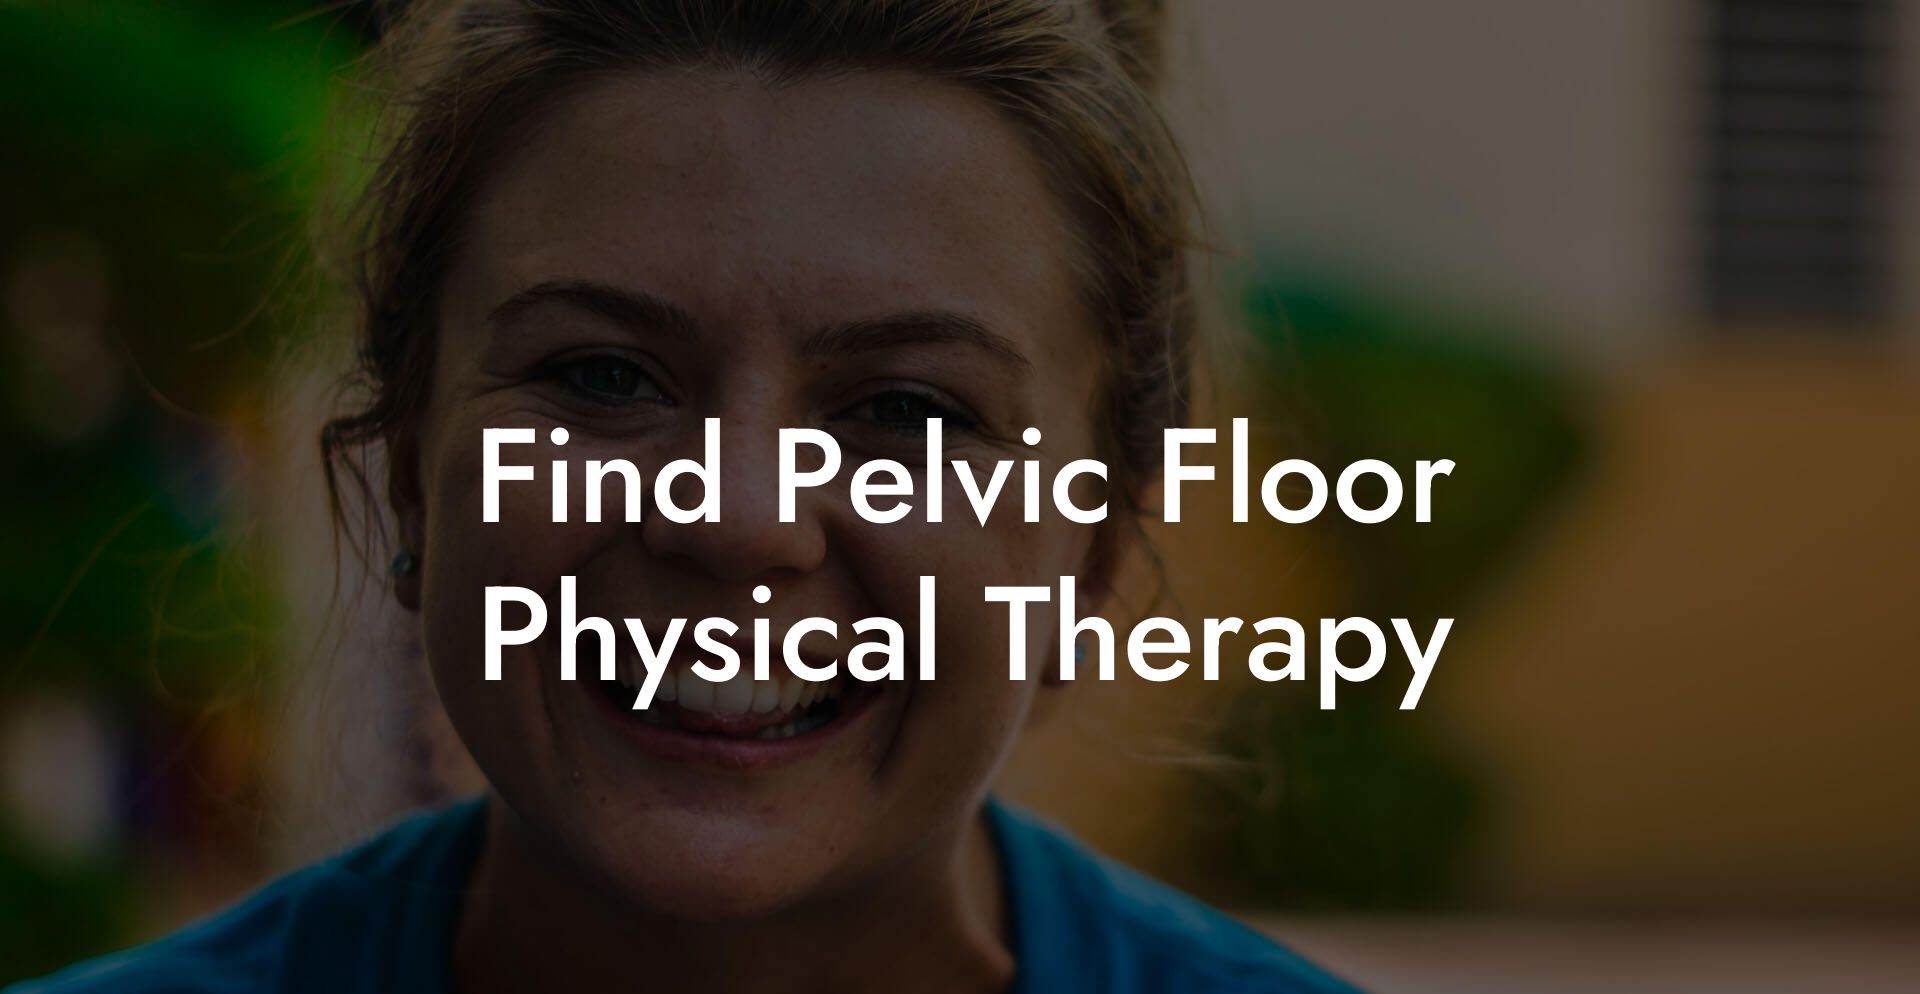 Find Pelvic Floor Physical Therapy